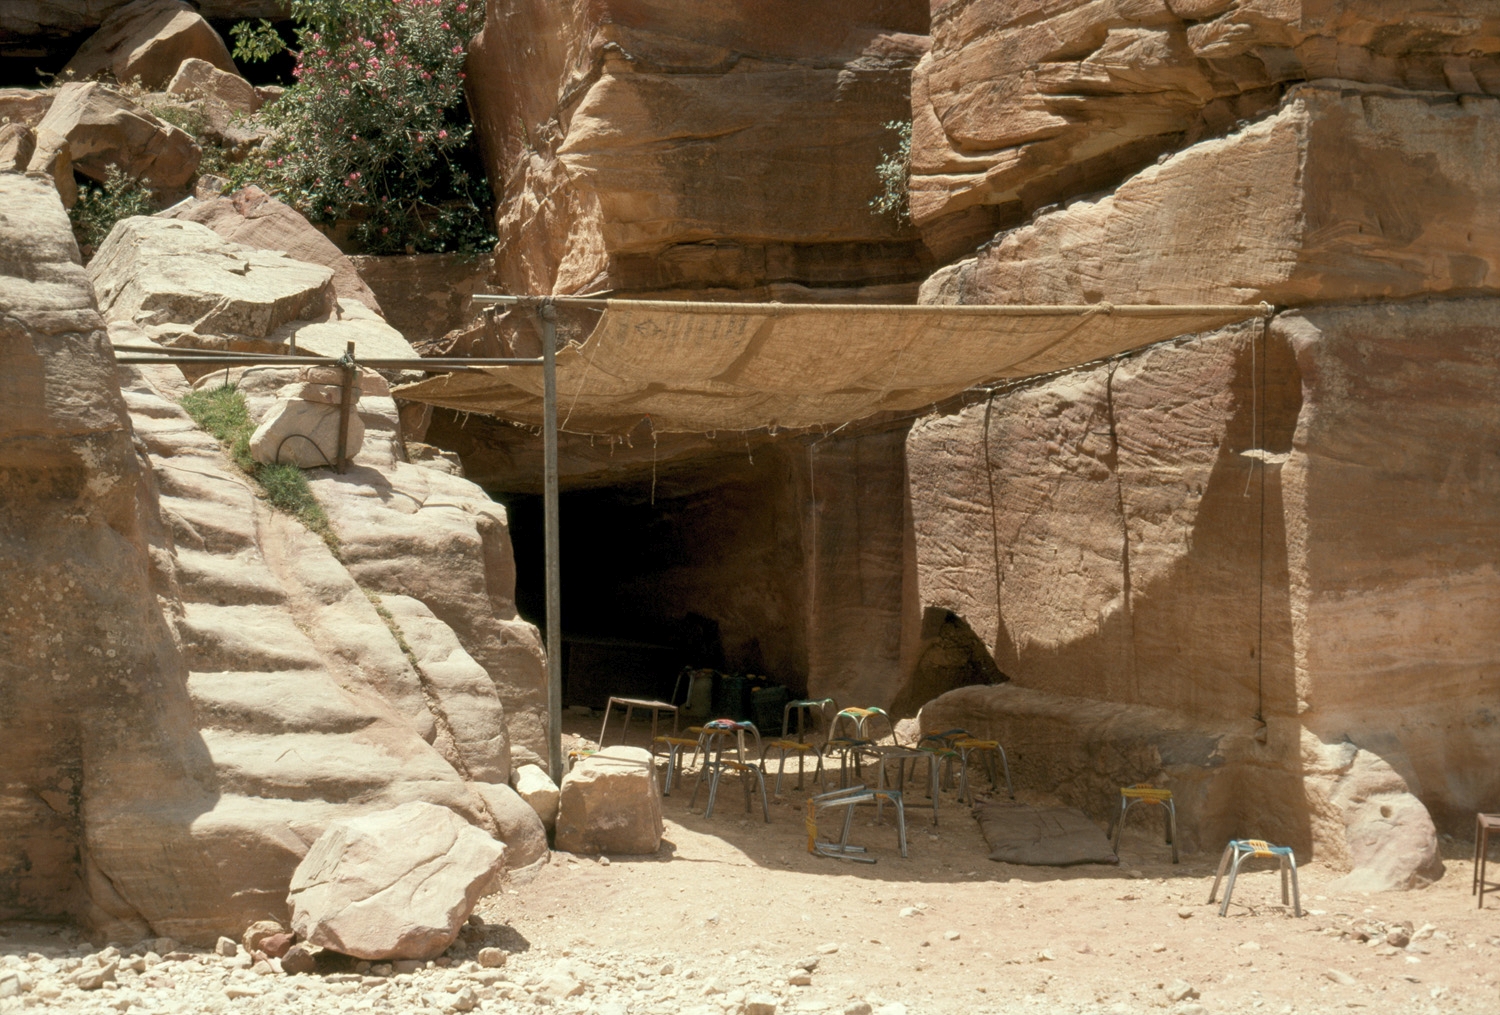 Outer Siq, stone steps and tent shelter at cave